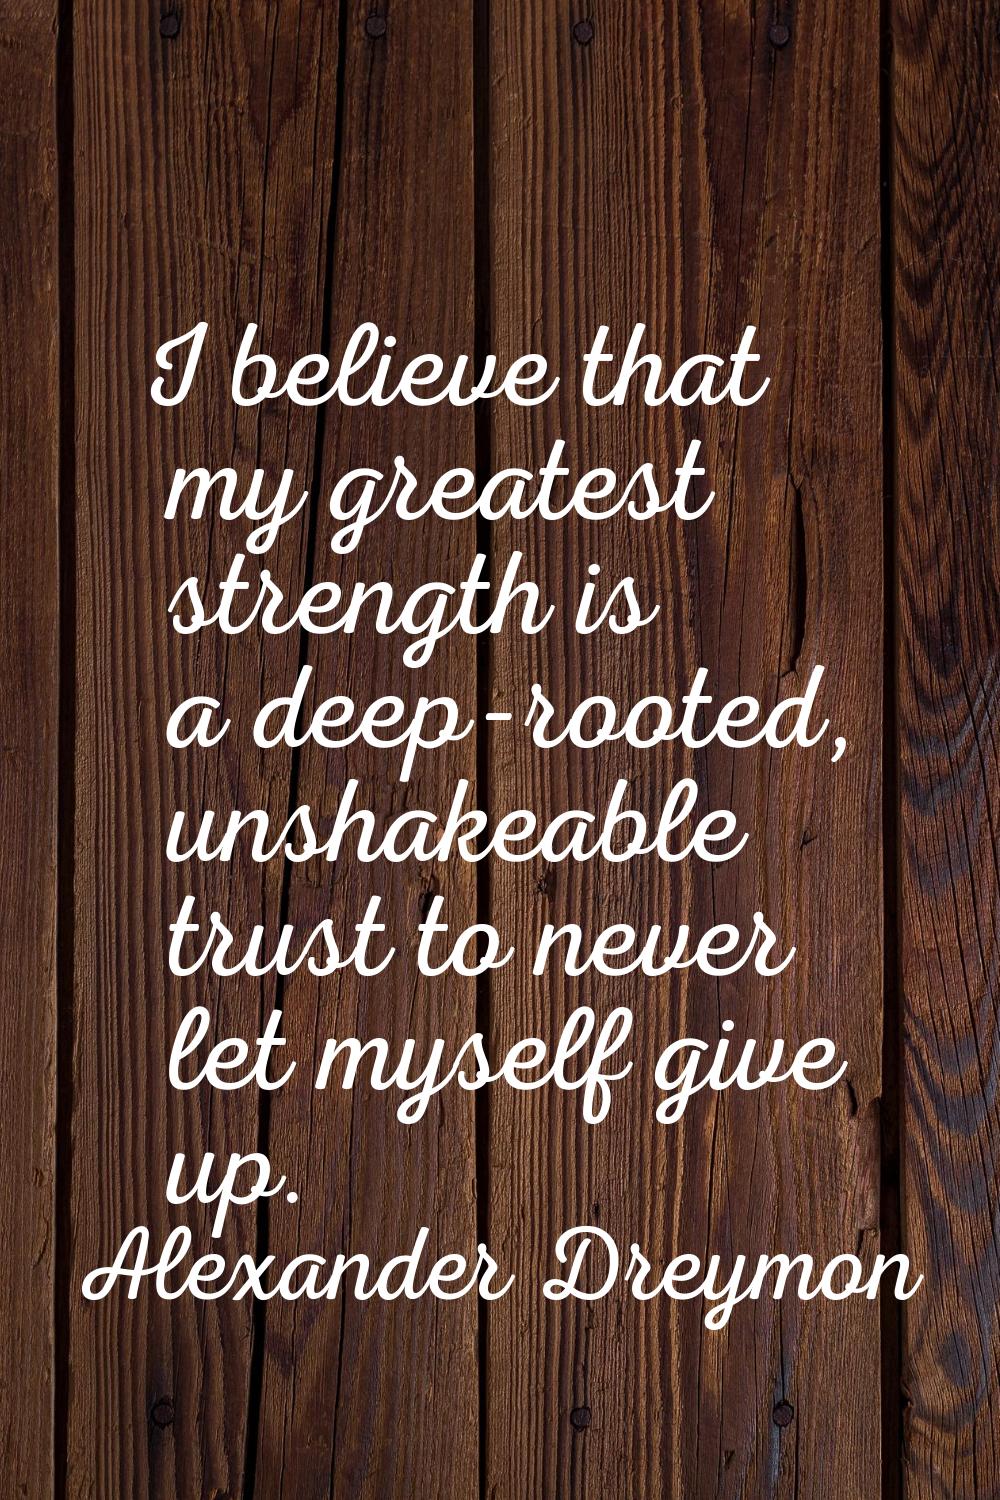 I believe that my greatest strength is a deep-rooted, unshakeable trust to never let myself give up